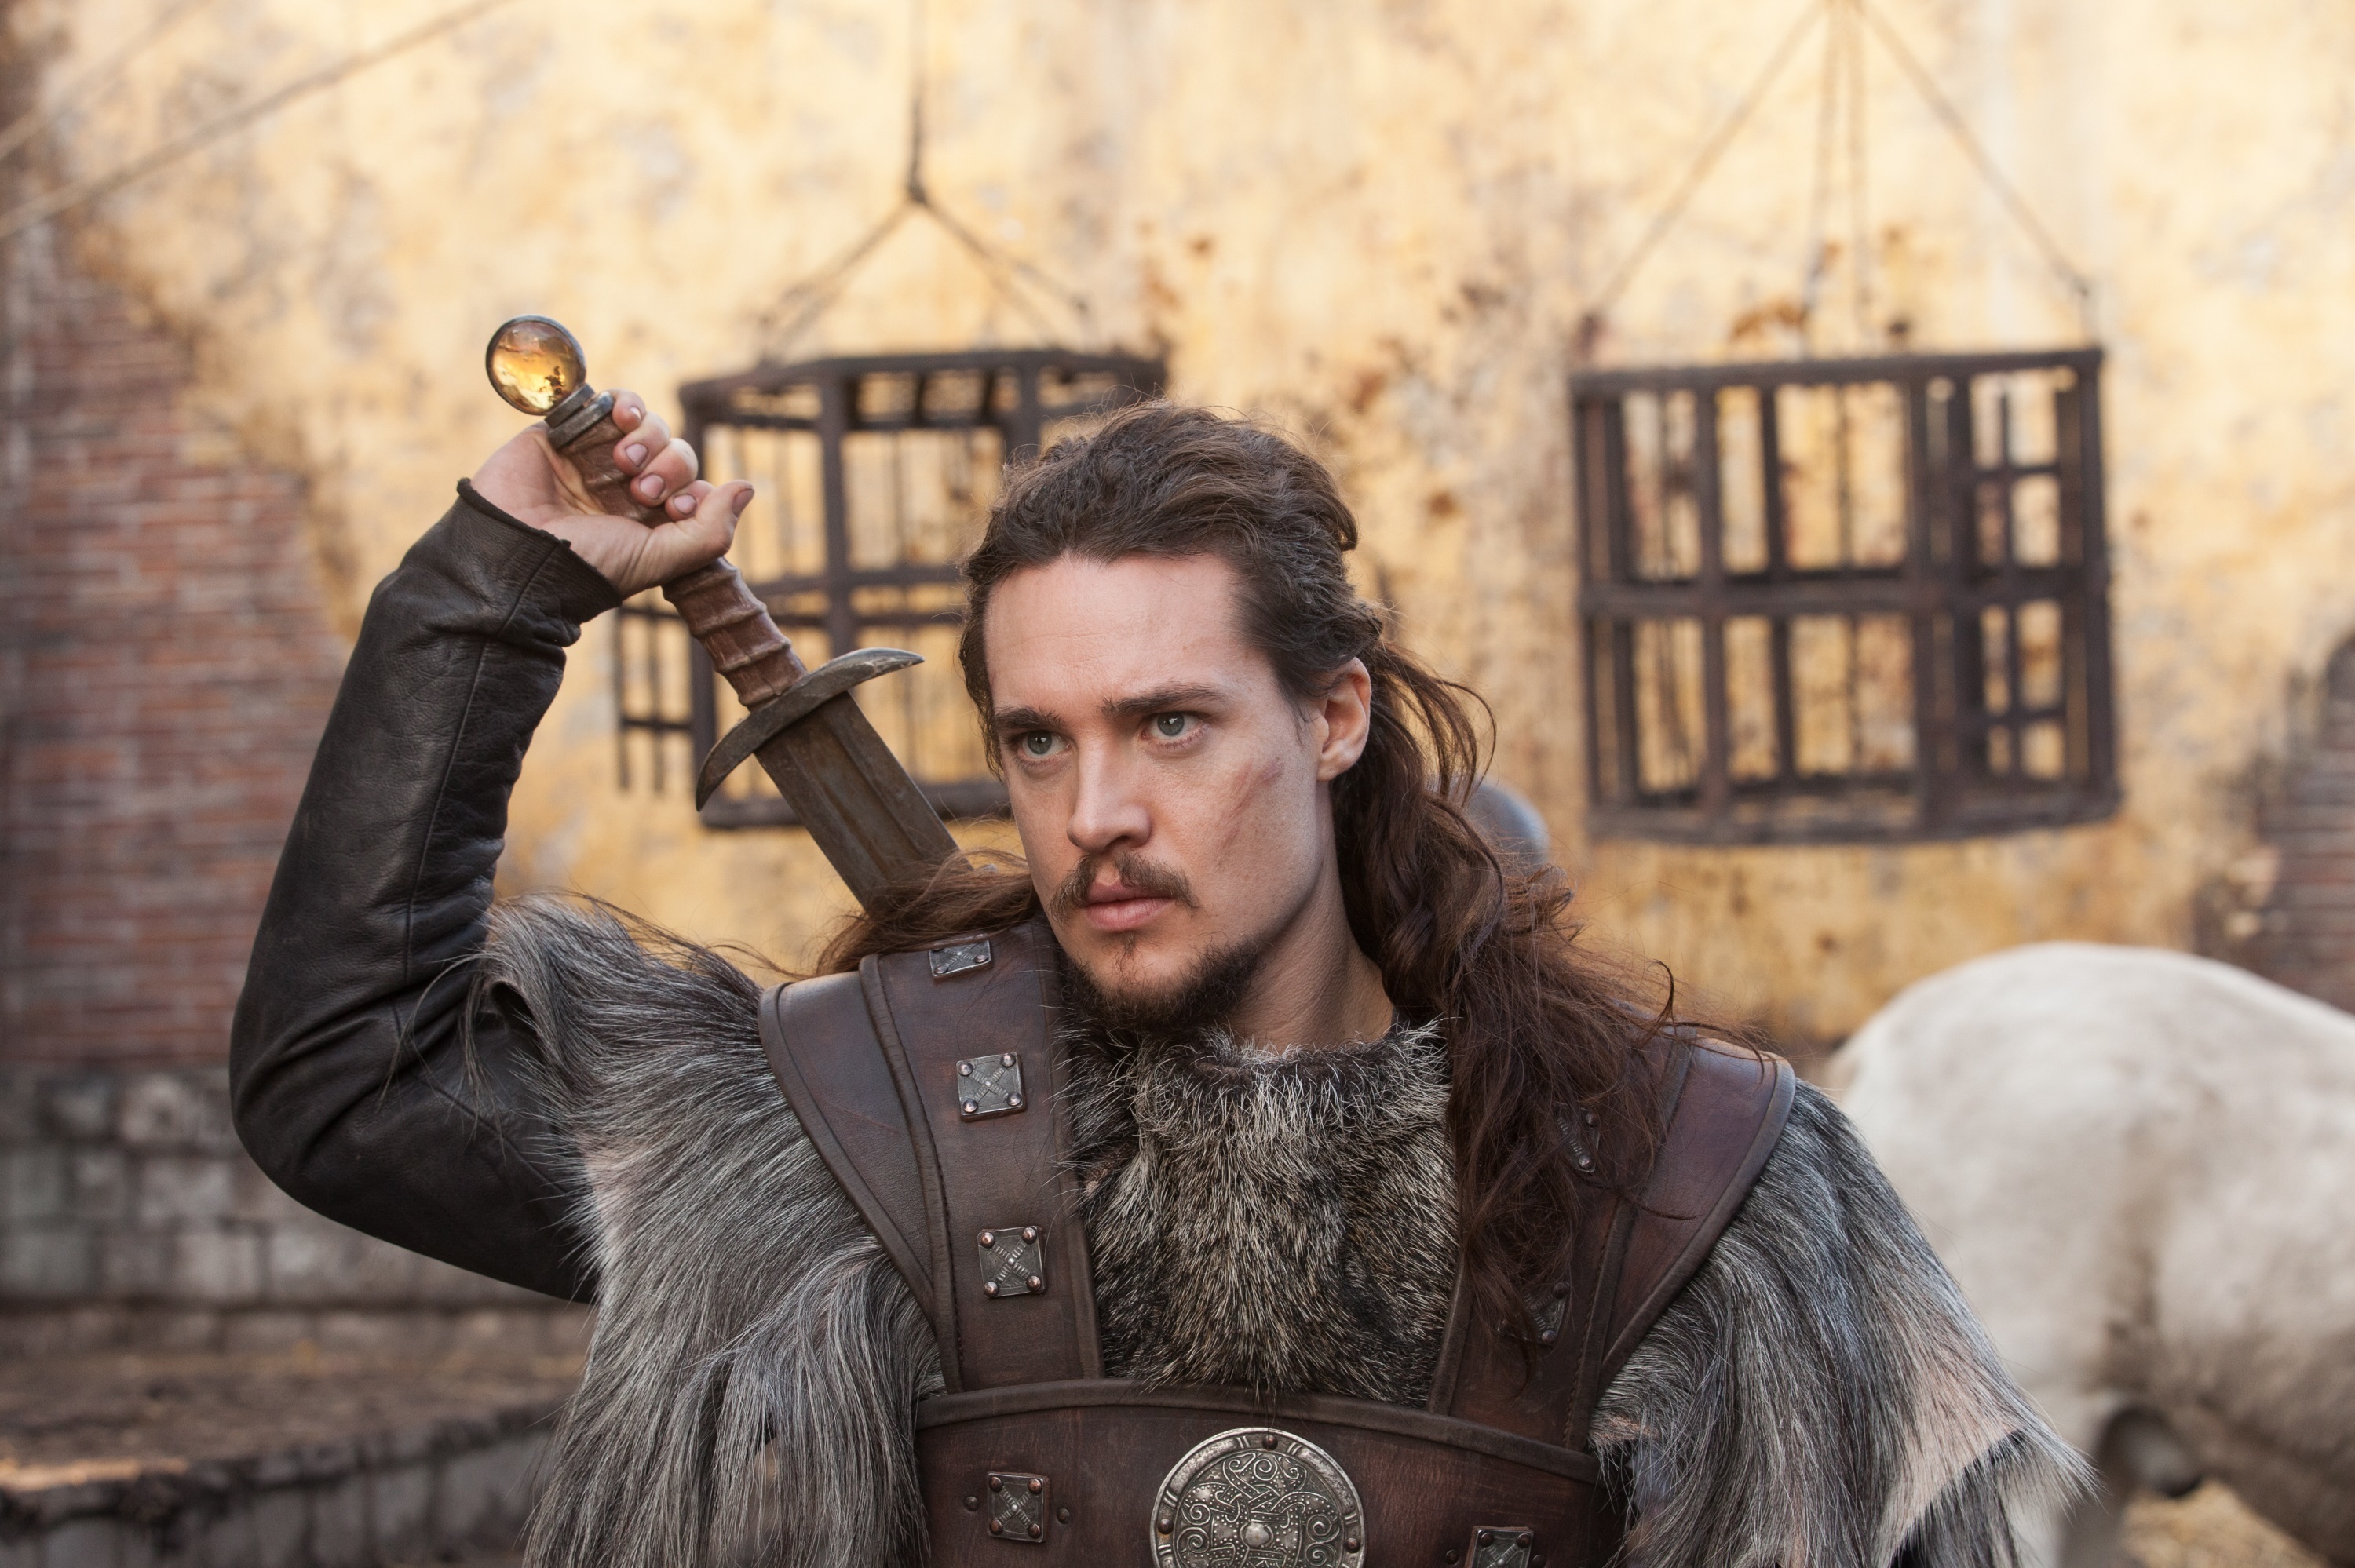 <p>Alexander Dreymon stars as Uhtred of Bebbanburg on the BBC America and Netflix historical drama "The Last Kingdom." Uhtred was born into Saxon nobility but raised by the Danish invaders who conquered his homeland. Although brave and just, Uhtred struggles with his allegiances and with his desire to reclaim the kingdom that was once his. A fifth and final season debuted in 2022 and a movie wrapping things up dropped in 2023.</p>